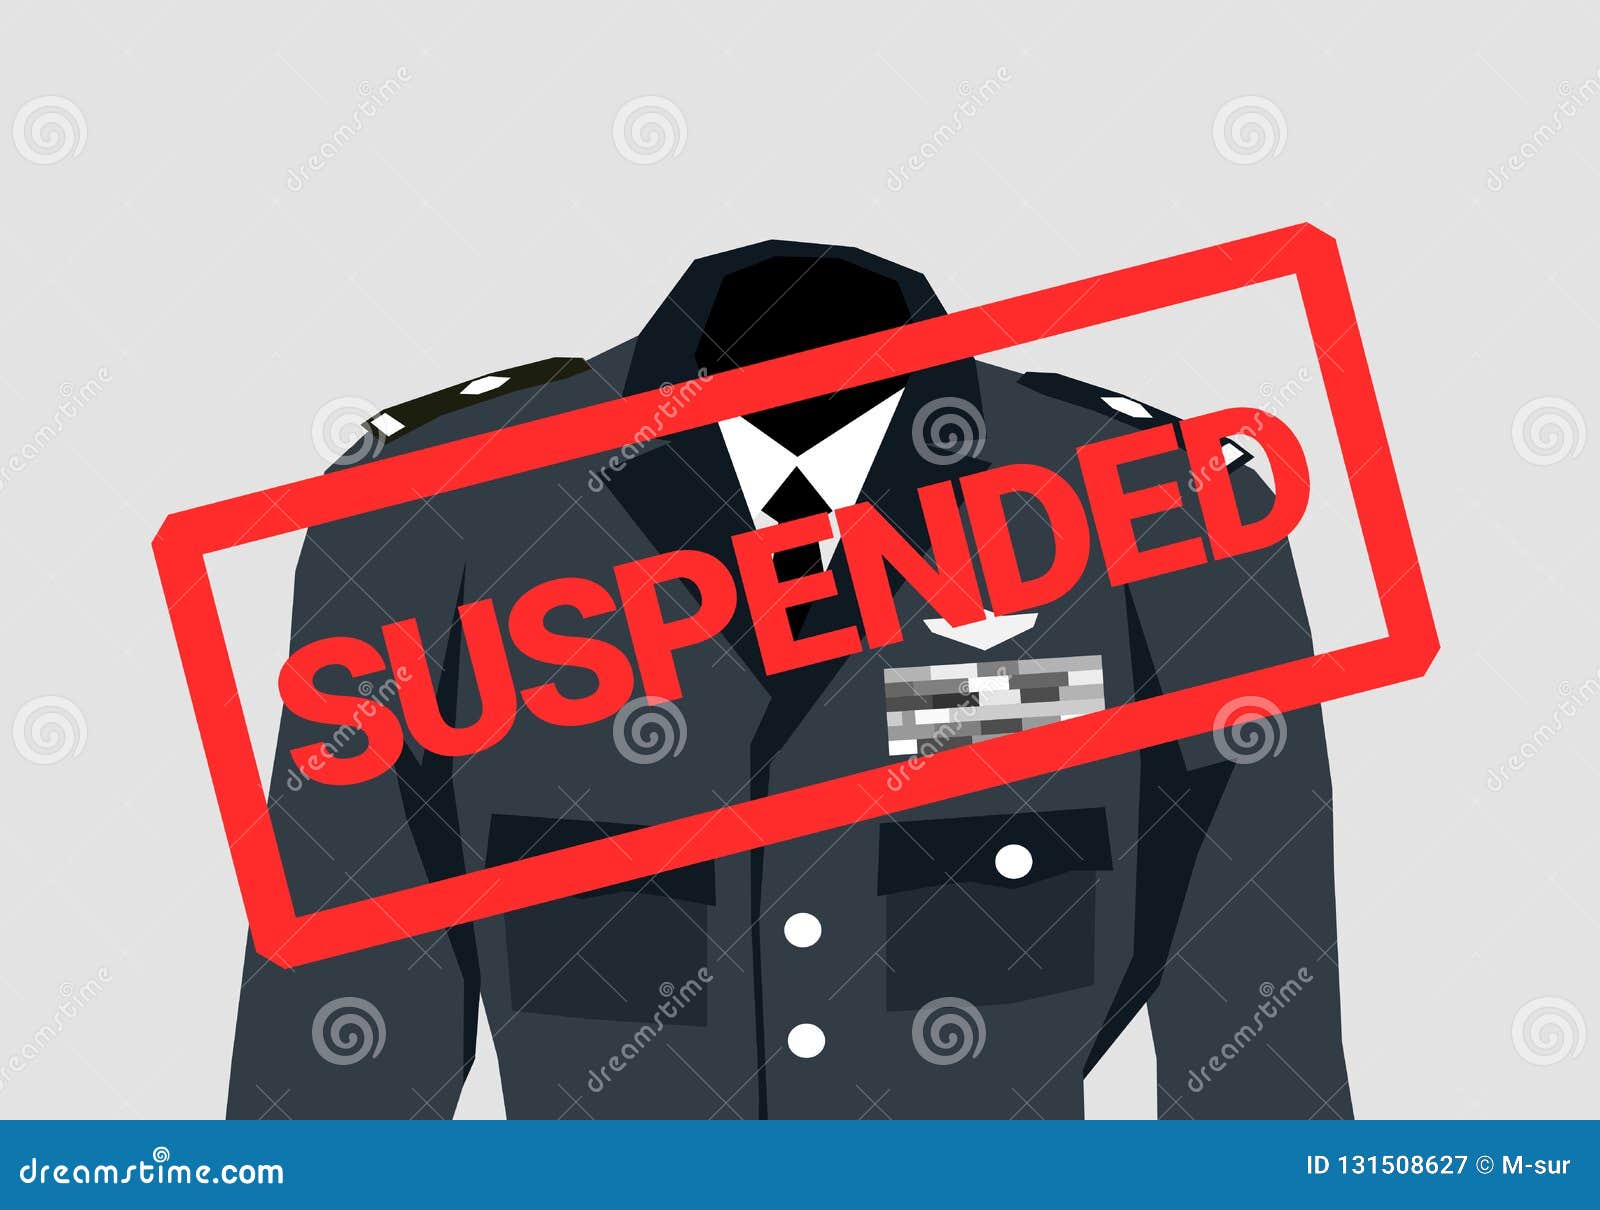 military officer, combatant and soldier is suspended